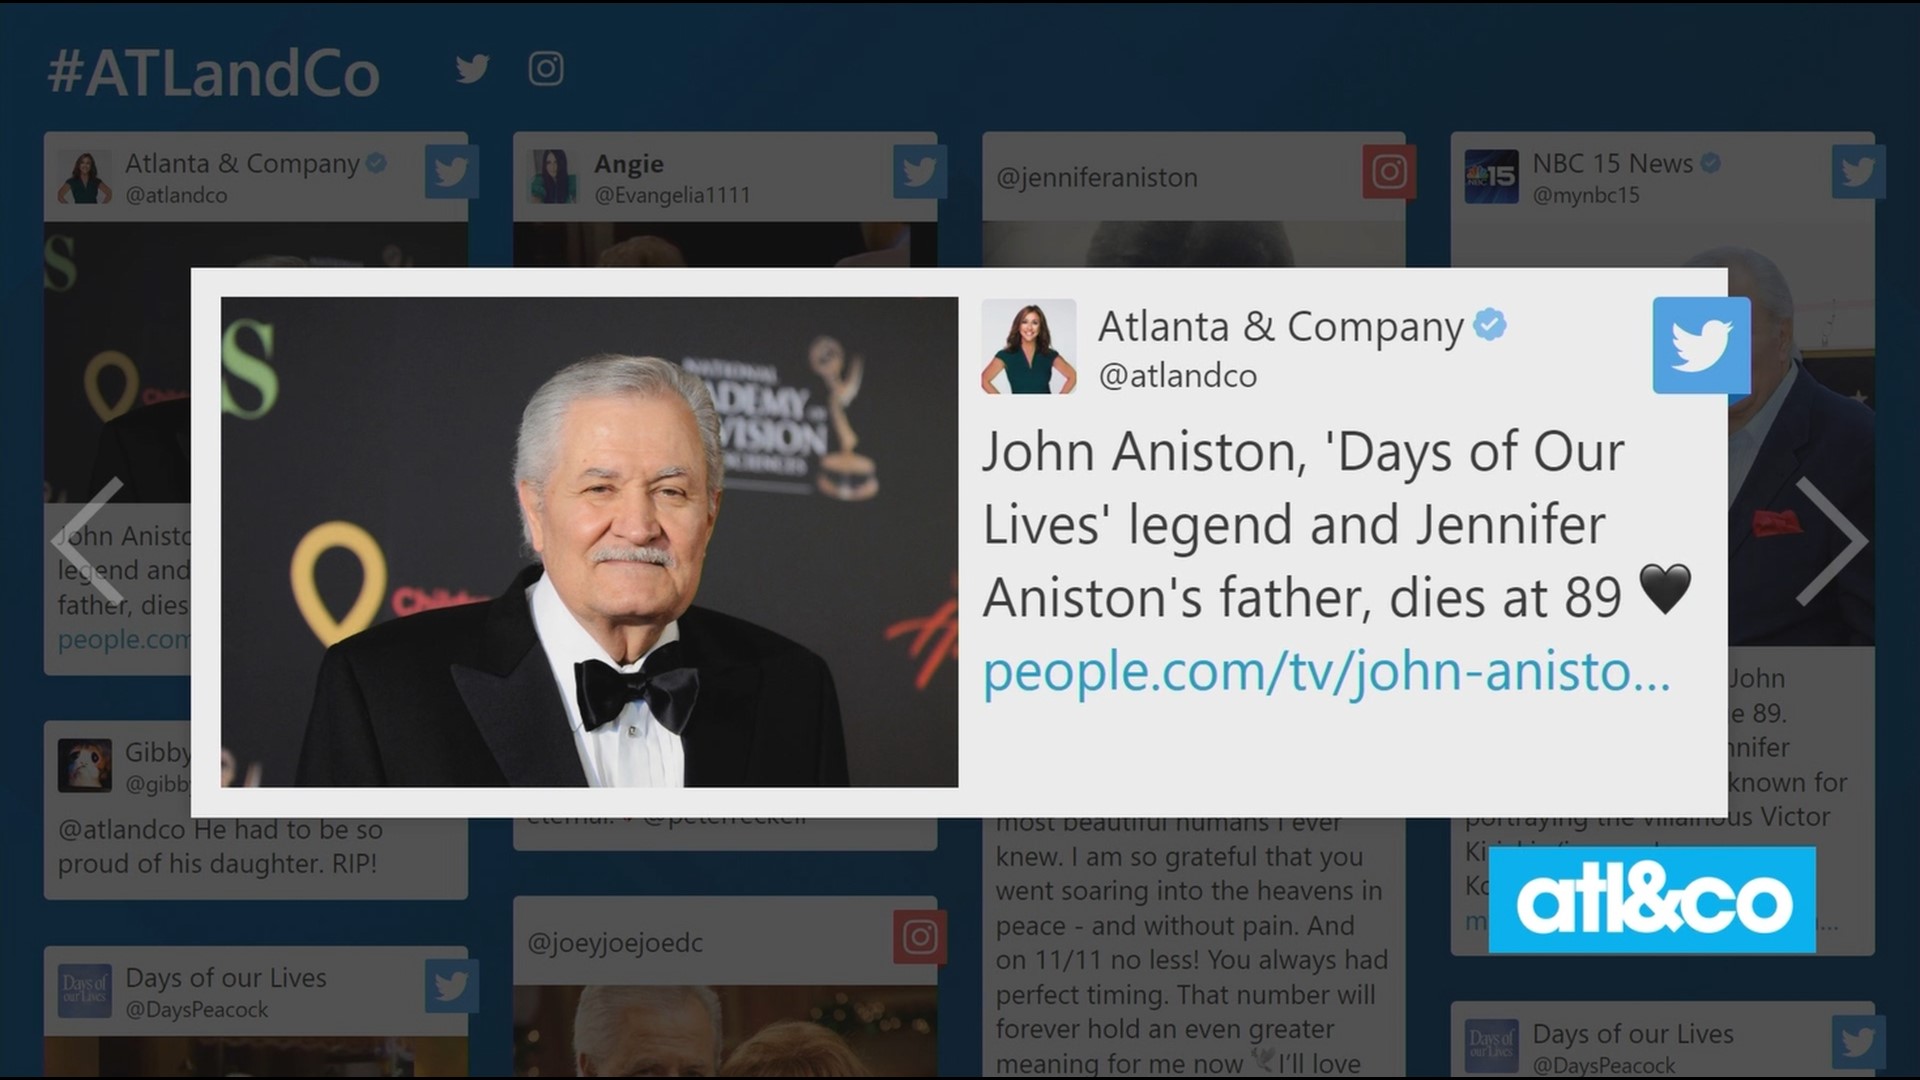 Long live Victor Kiriakis! Emmy-winning 'Days of Our Lives' star John Aniston has passed away at the age of 89.